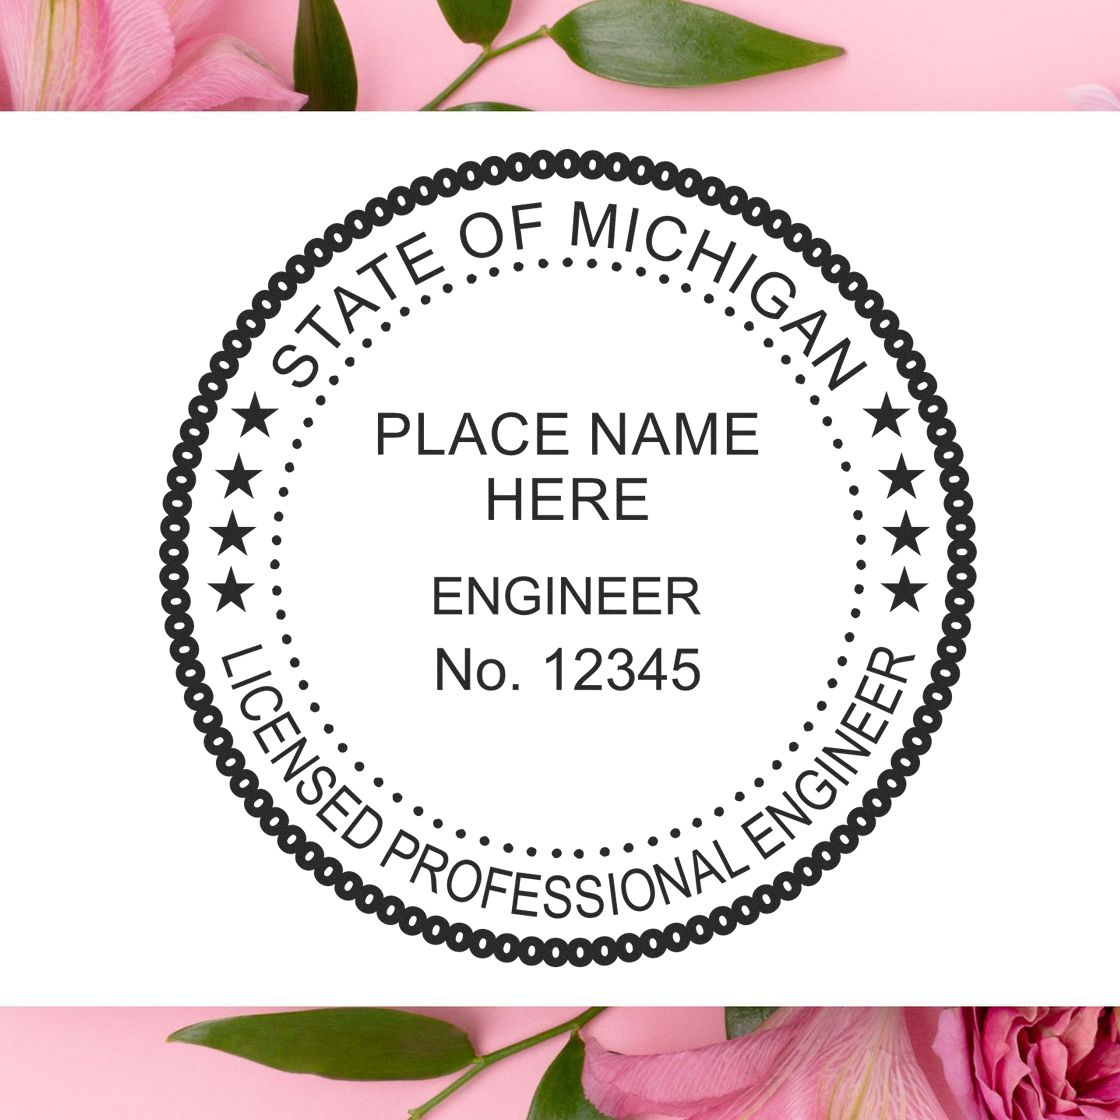 A lifestyle photo showing a stamped image of the Digital Michigan PE Stamp and Electronic Seal for Michigan Engineer on a piece of paper